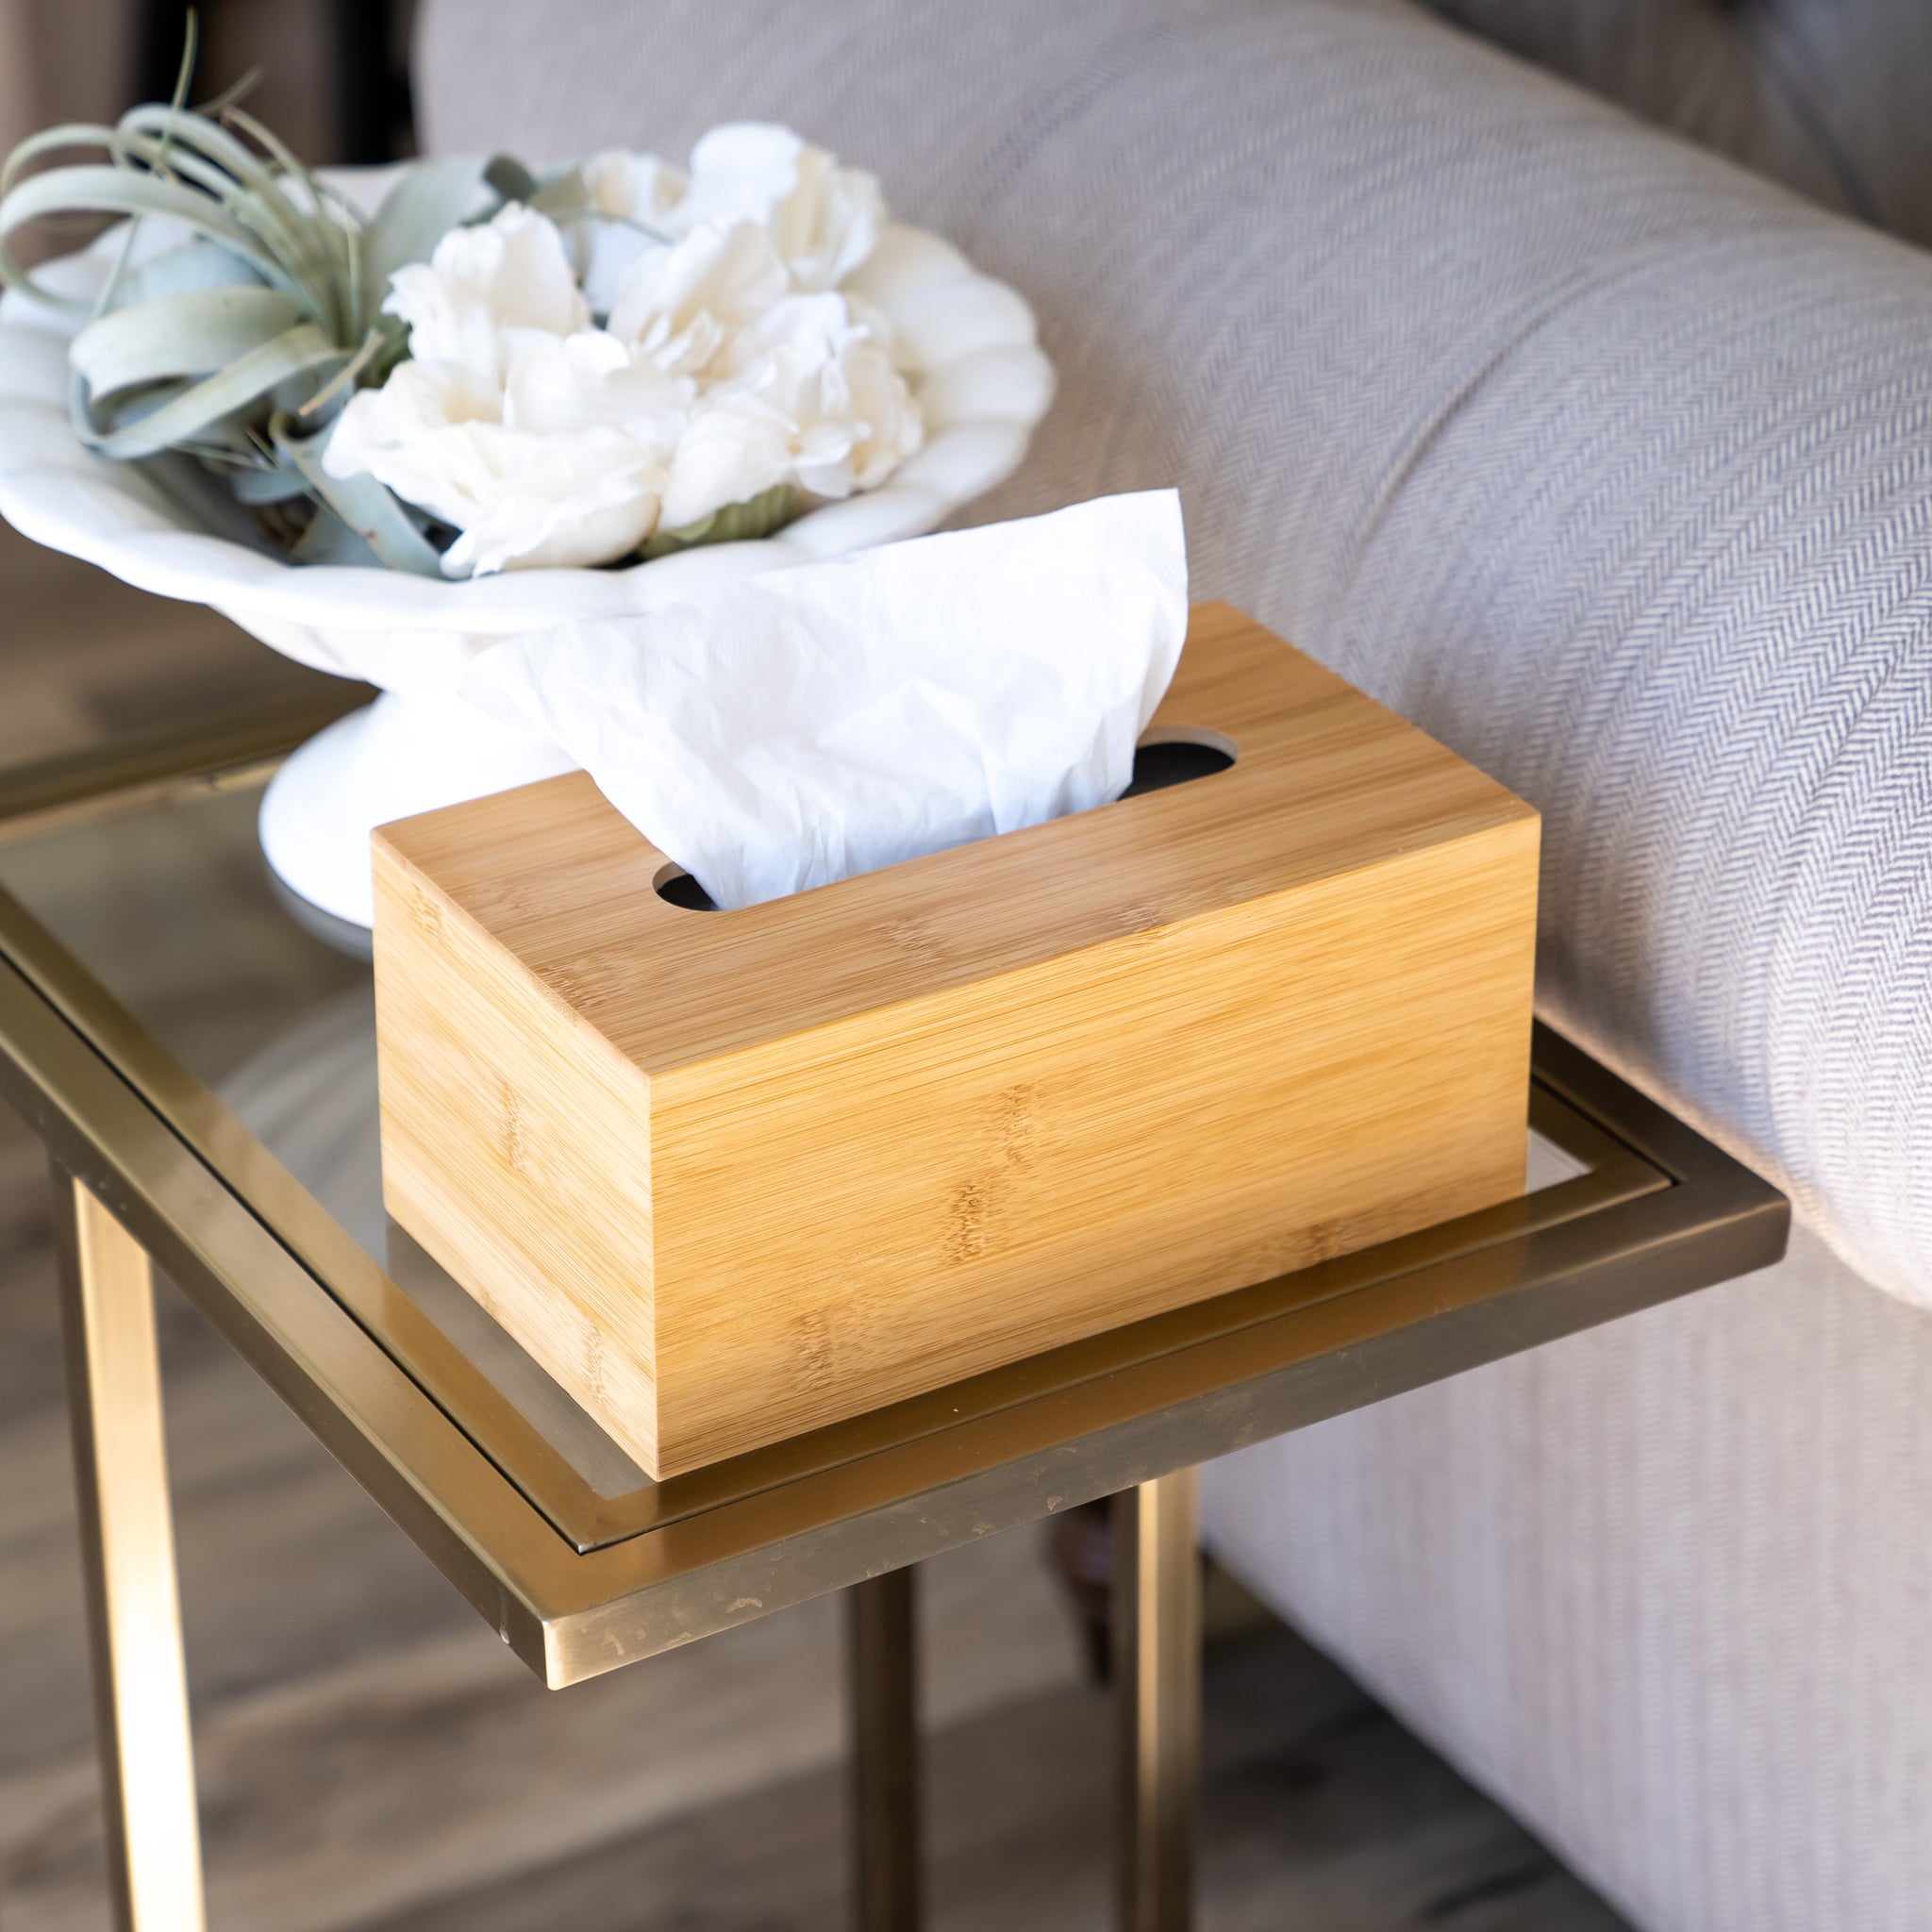 Faux Bamboo Tissue Box Cover